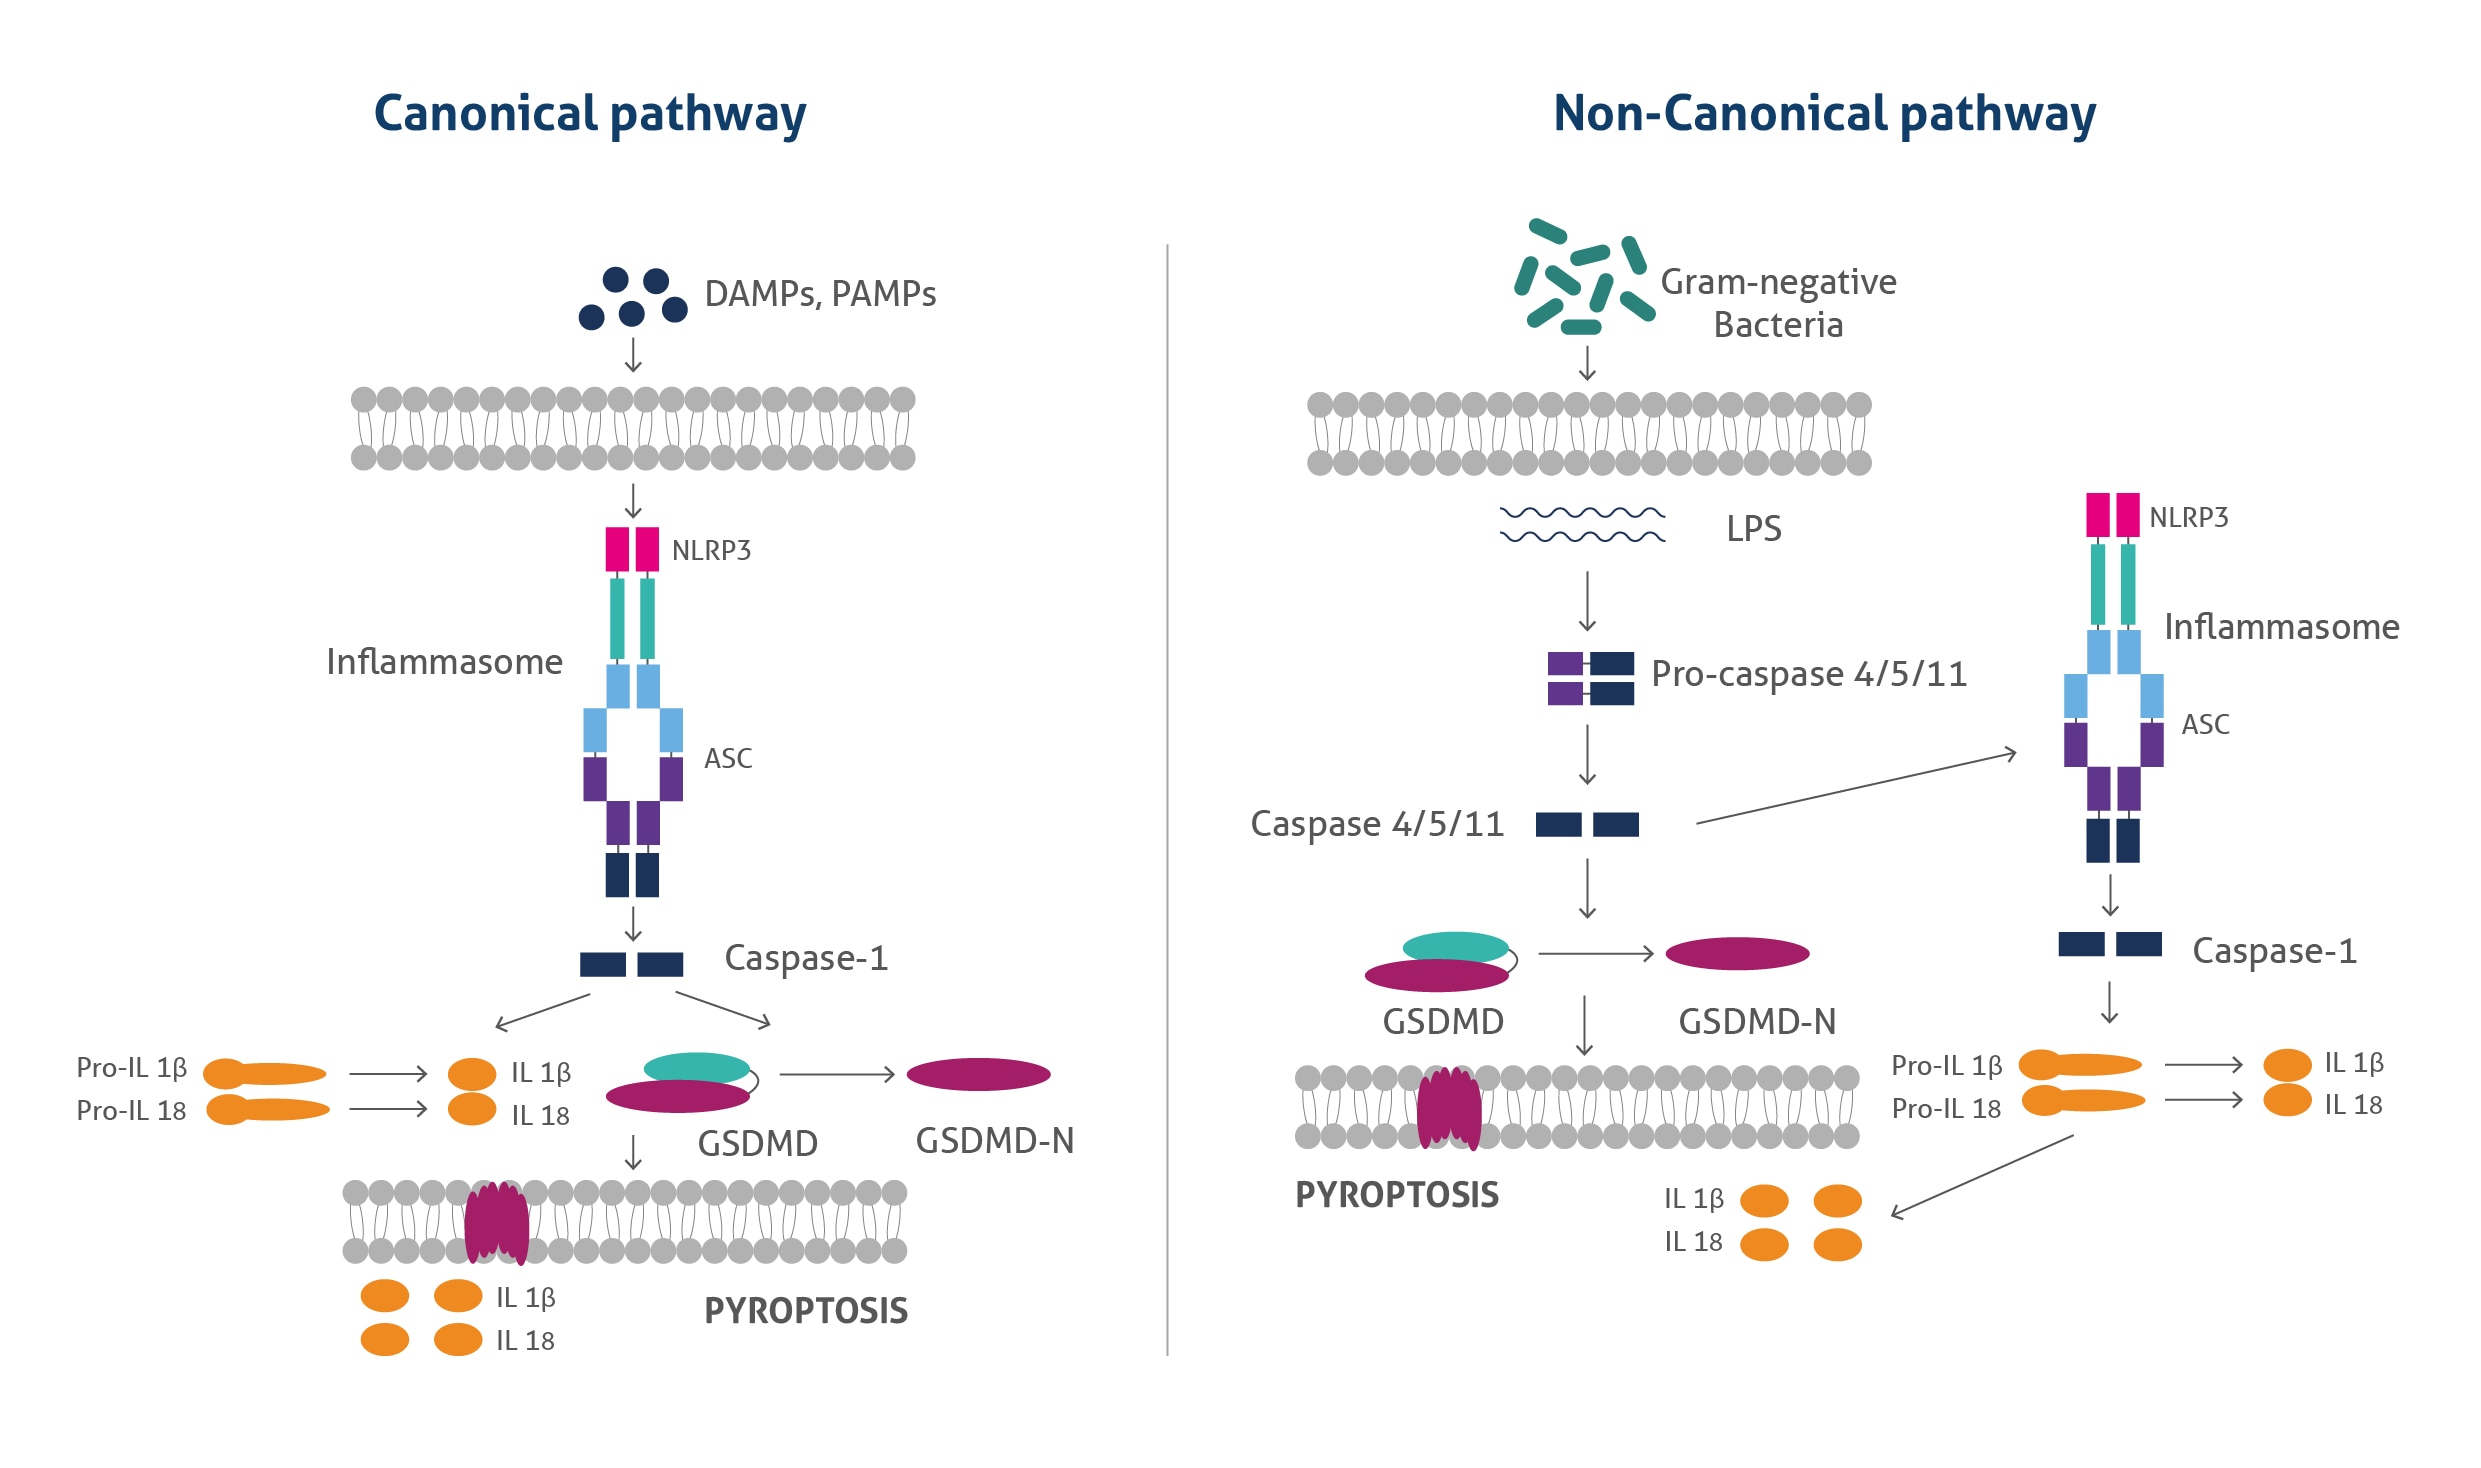 The canonical and noncanonical pyroptosis pathways